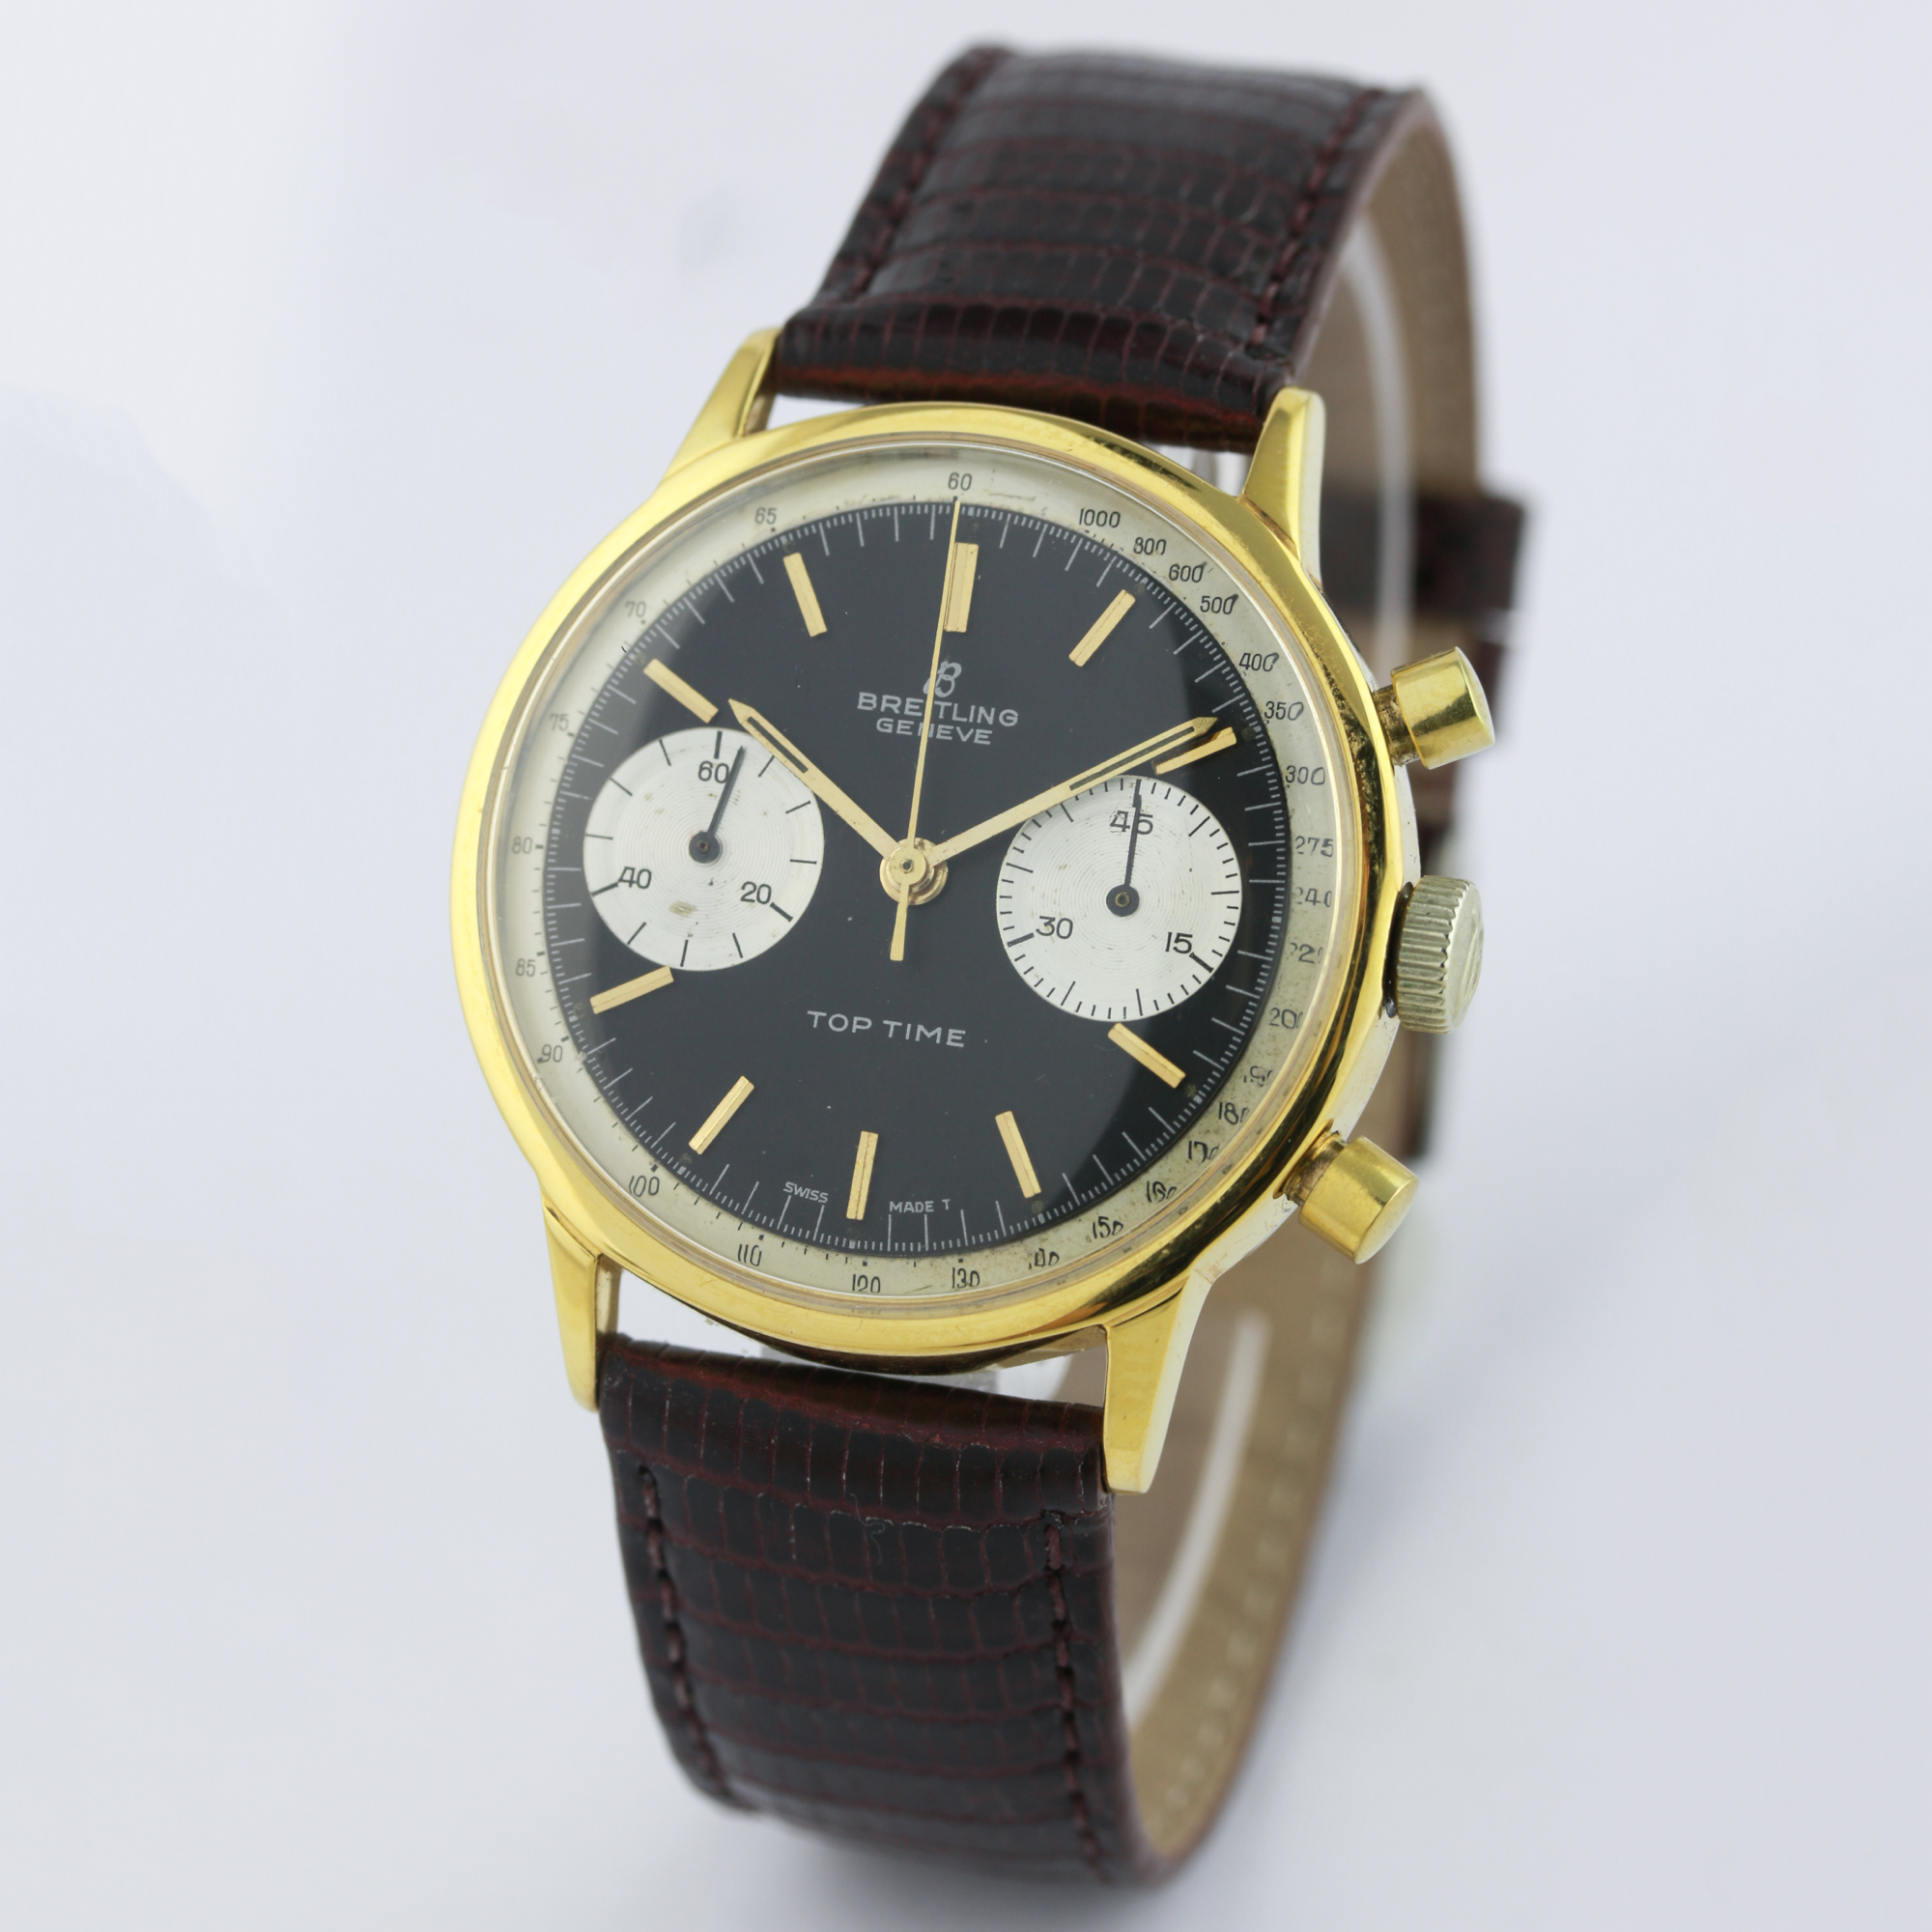 A GENTLEMAN'S GOLD PLATED BREITLING TOP TIME CHRONOGRAPH WRIST WATCH CIRCA 1960s, REF. 2000 D: Black - Image 2 of 7